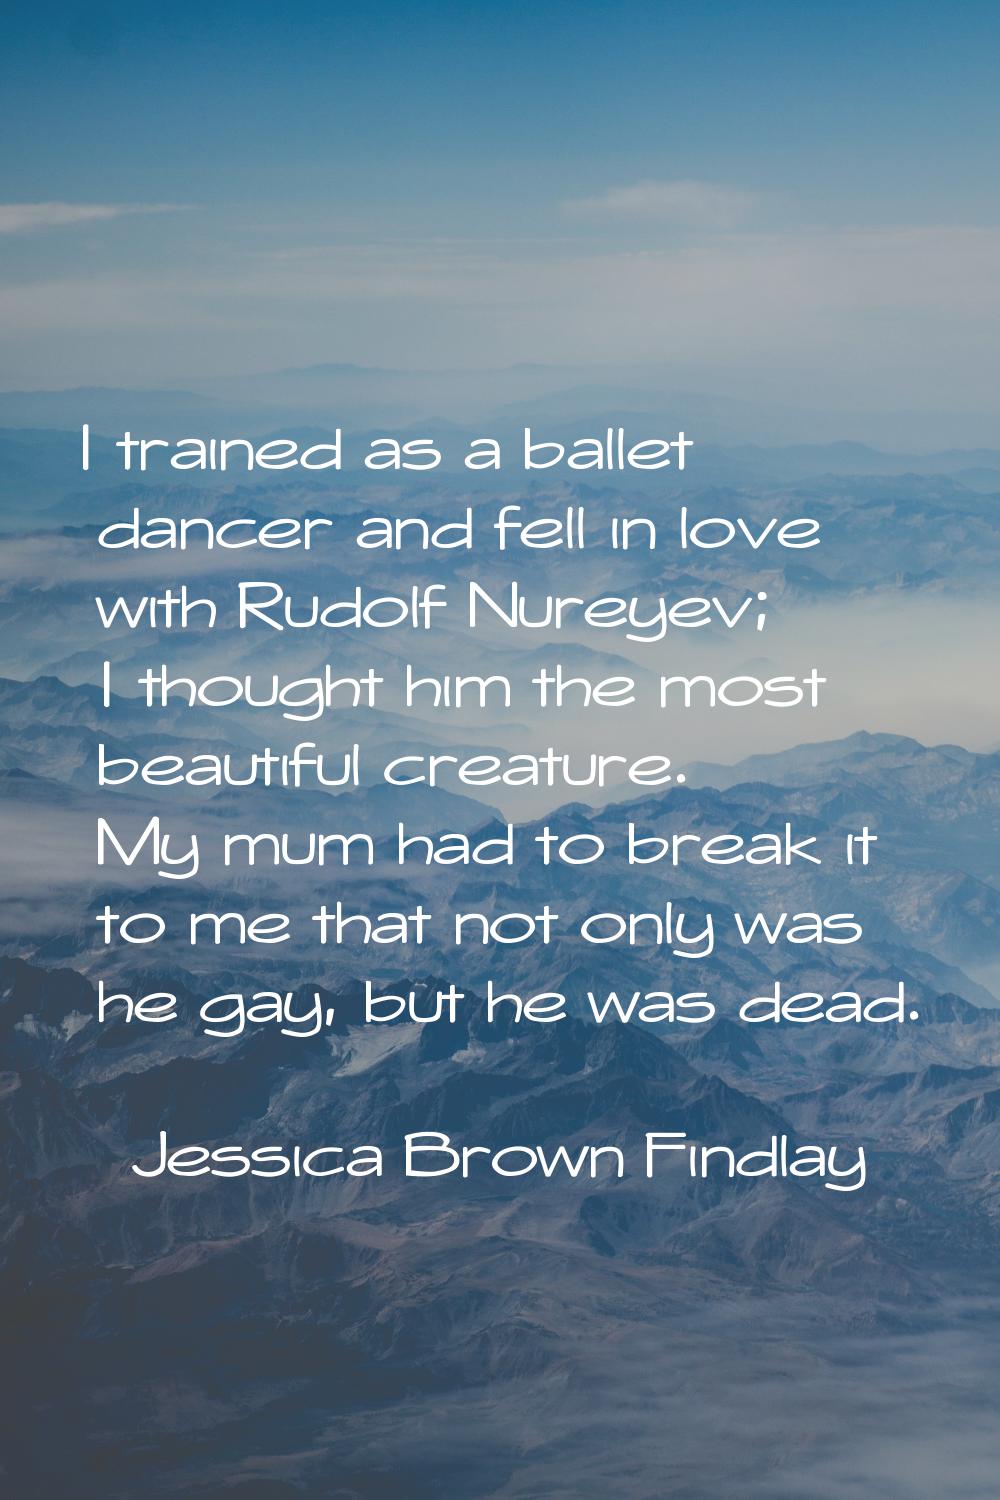 I trained as a ballet dancer and fell in love with Rudolf Nureyev; I thought him the most beautiful